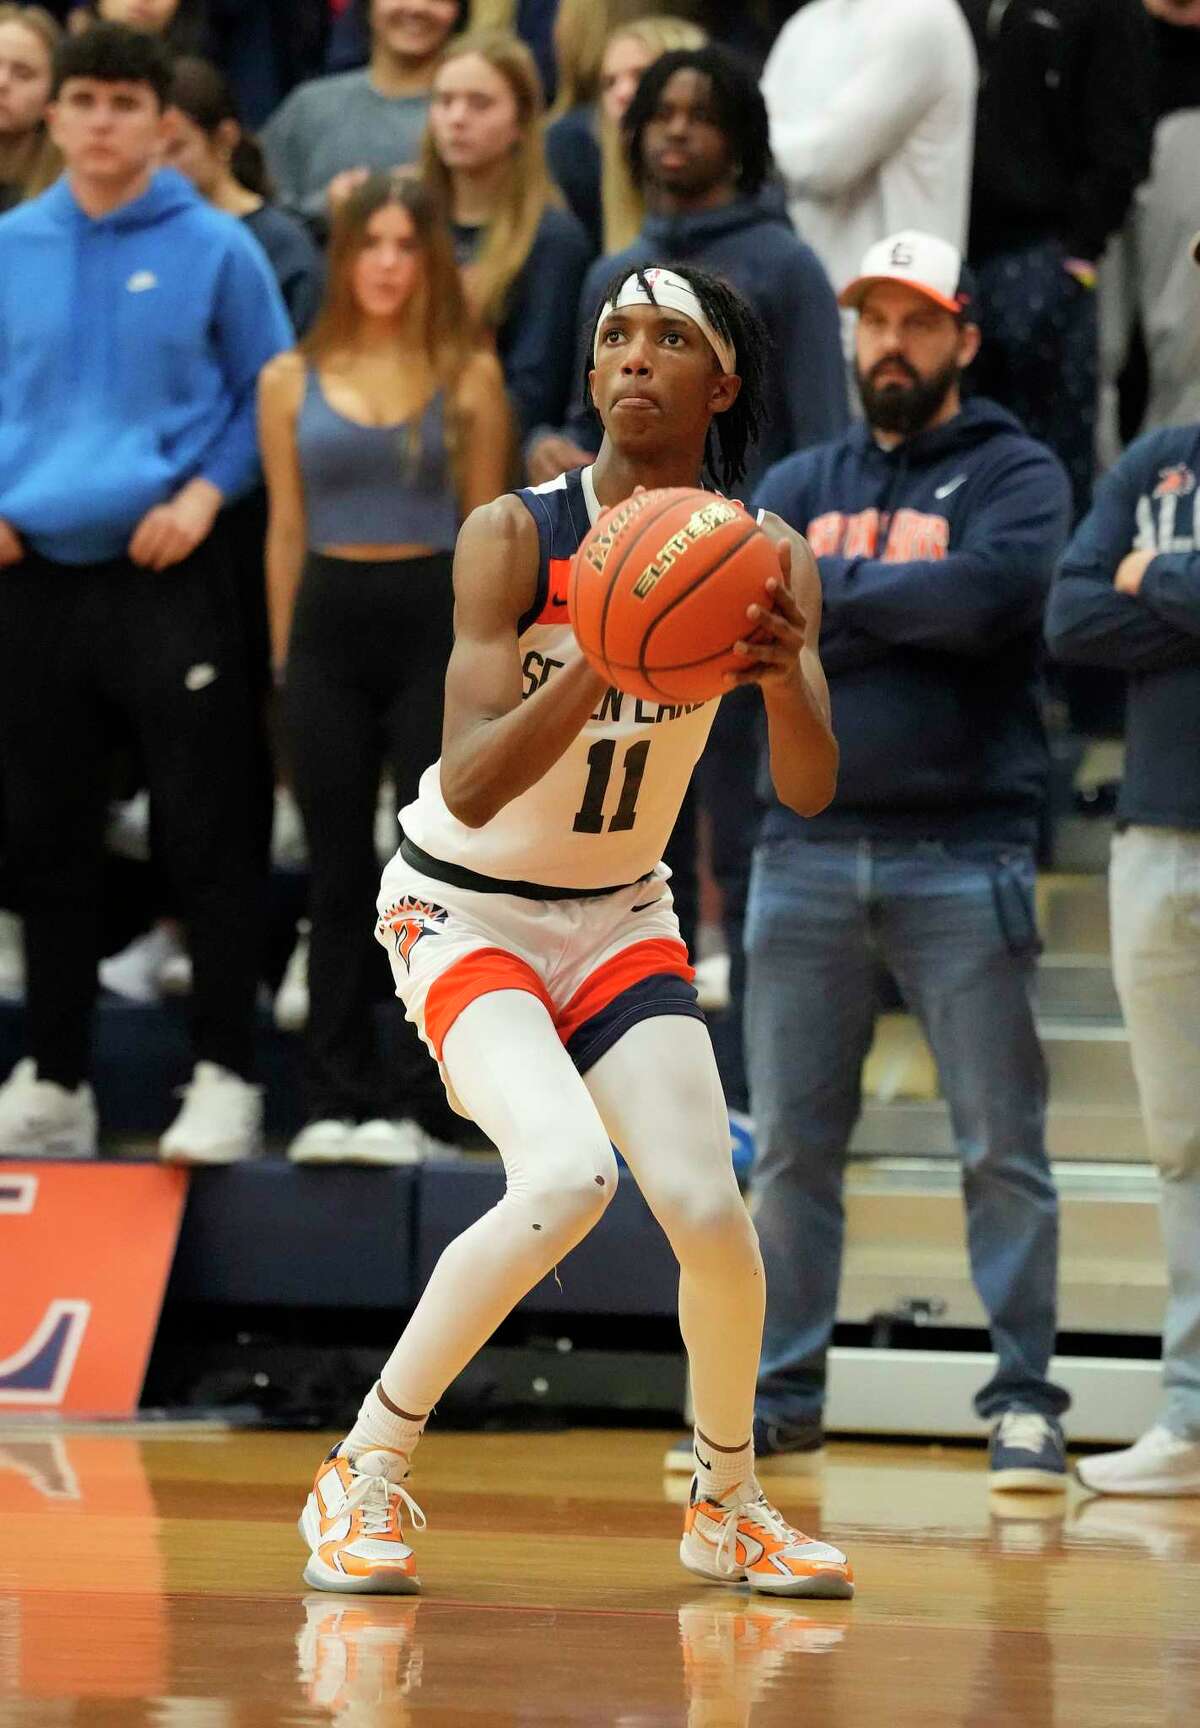 Seven Lakes High School's Nasir Price (11) sets up for a three-pointer during the second half of a District 19-6A boys basketball game at Seven Lakes High School on Friday, Jan. 27, 2023 in Katy. Seven Lakes High School beat Jordan High School82-72.